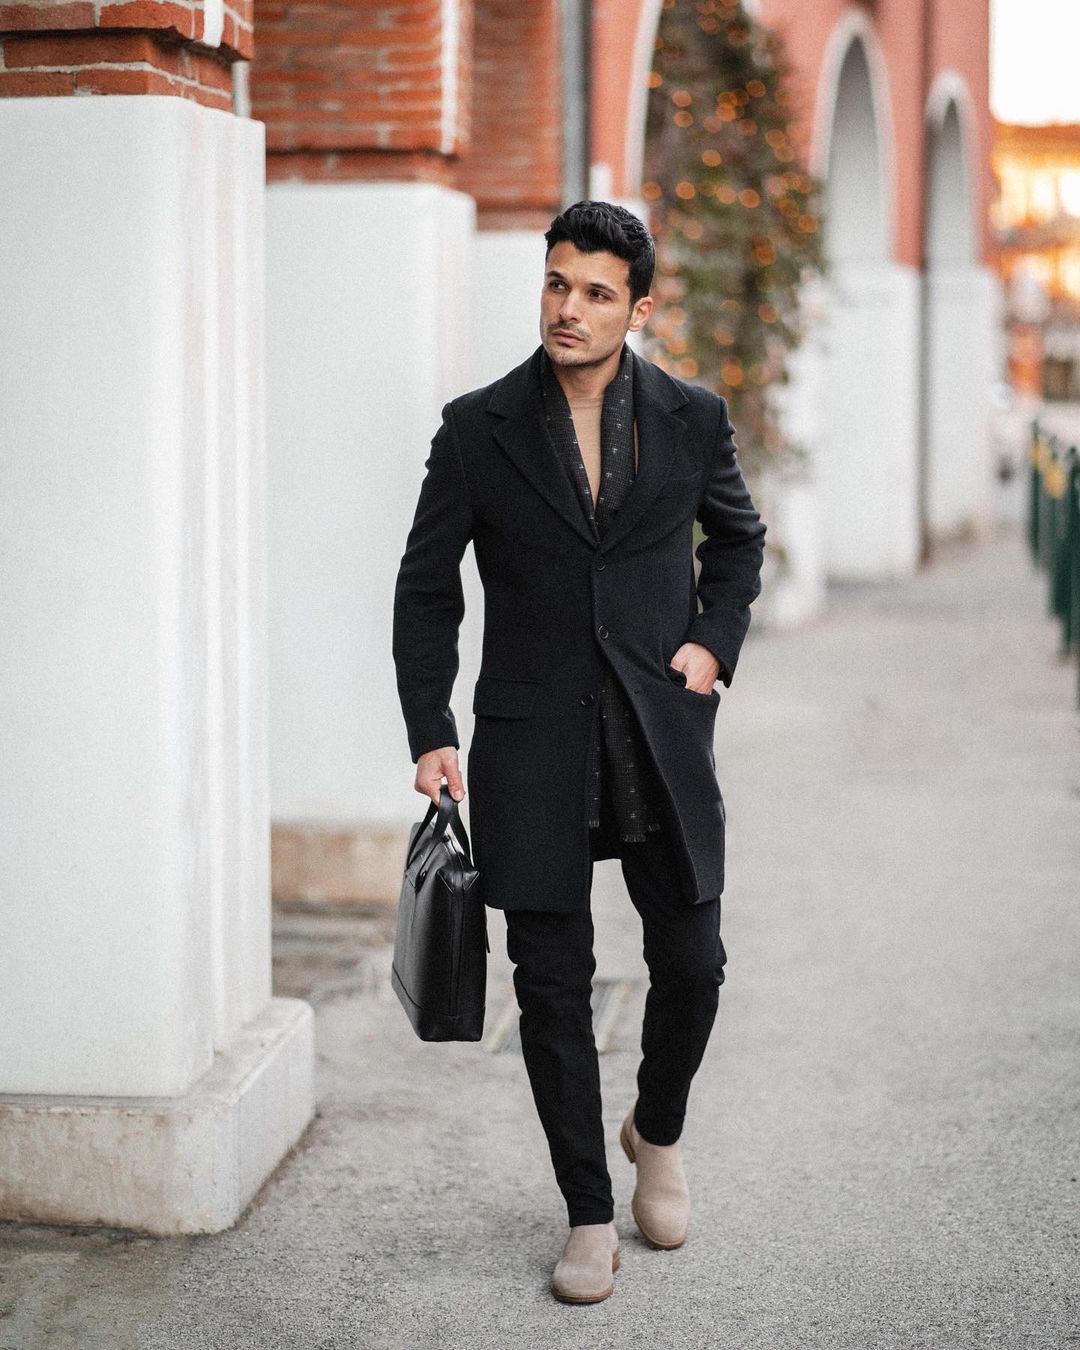 How to wear a black overcoat casually? 30 stylish black overcoat outfit ...